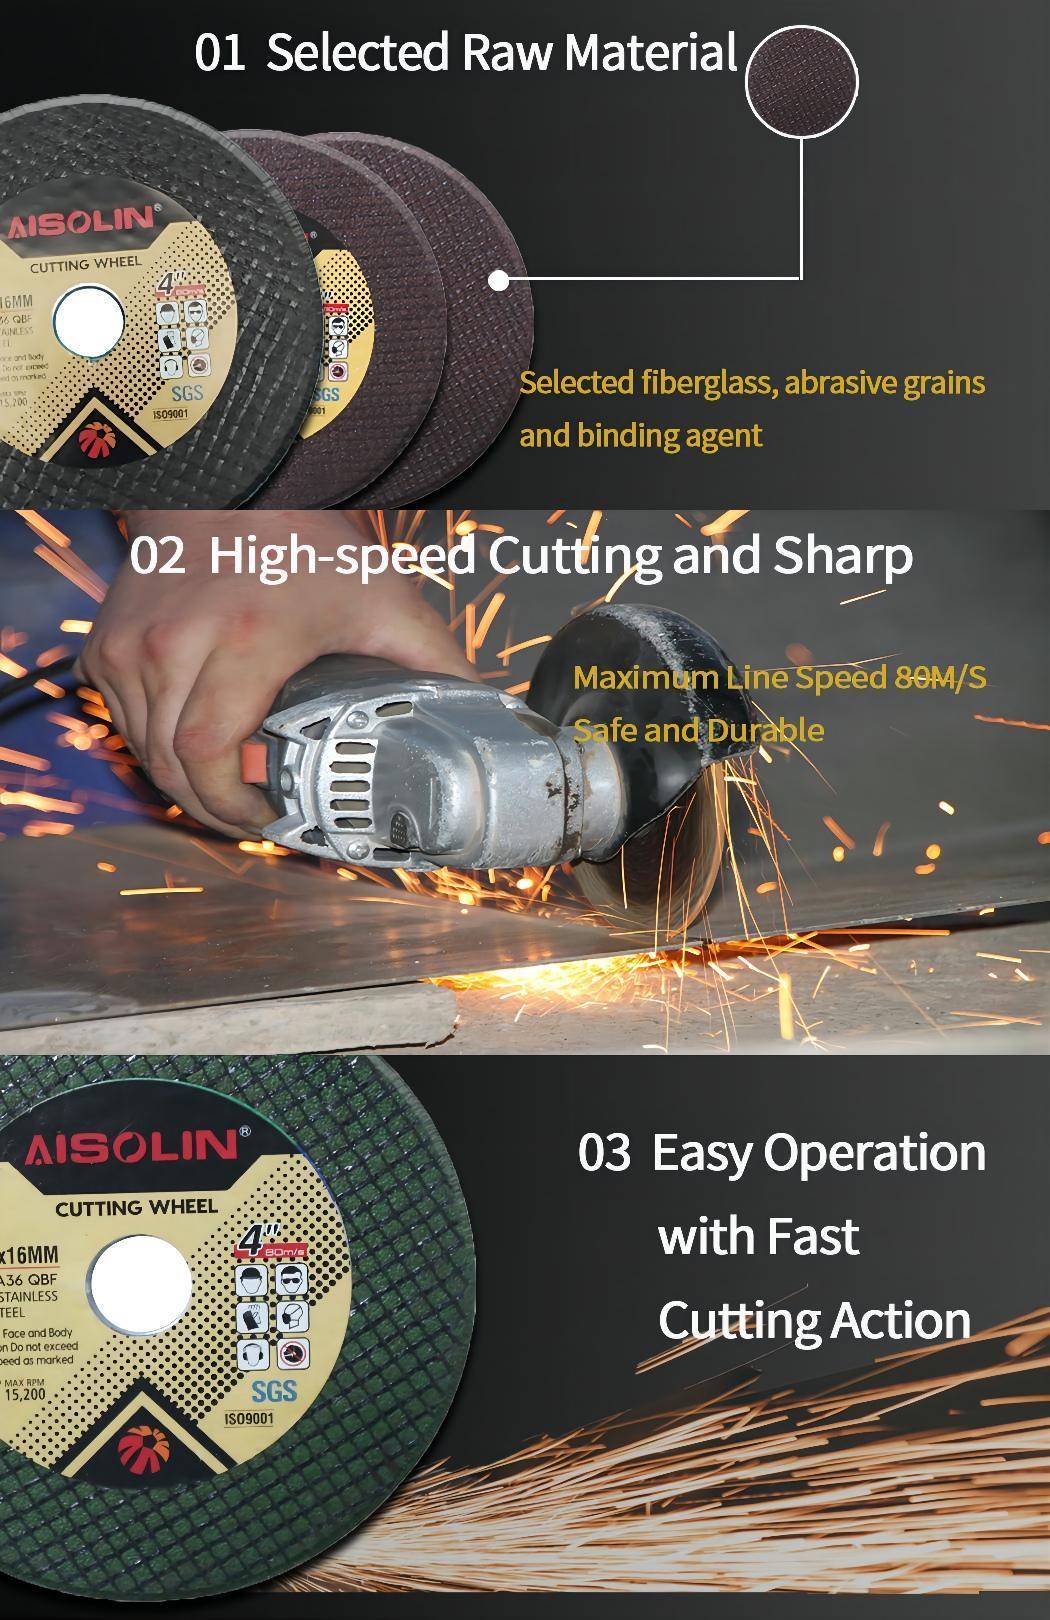 180mm Abrasive Fiberglass Reinforced Angle Grinder Inox Thin Cut off Wheel Stainless Metal Cutting Disc 4 1/2 Inch